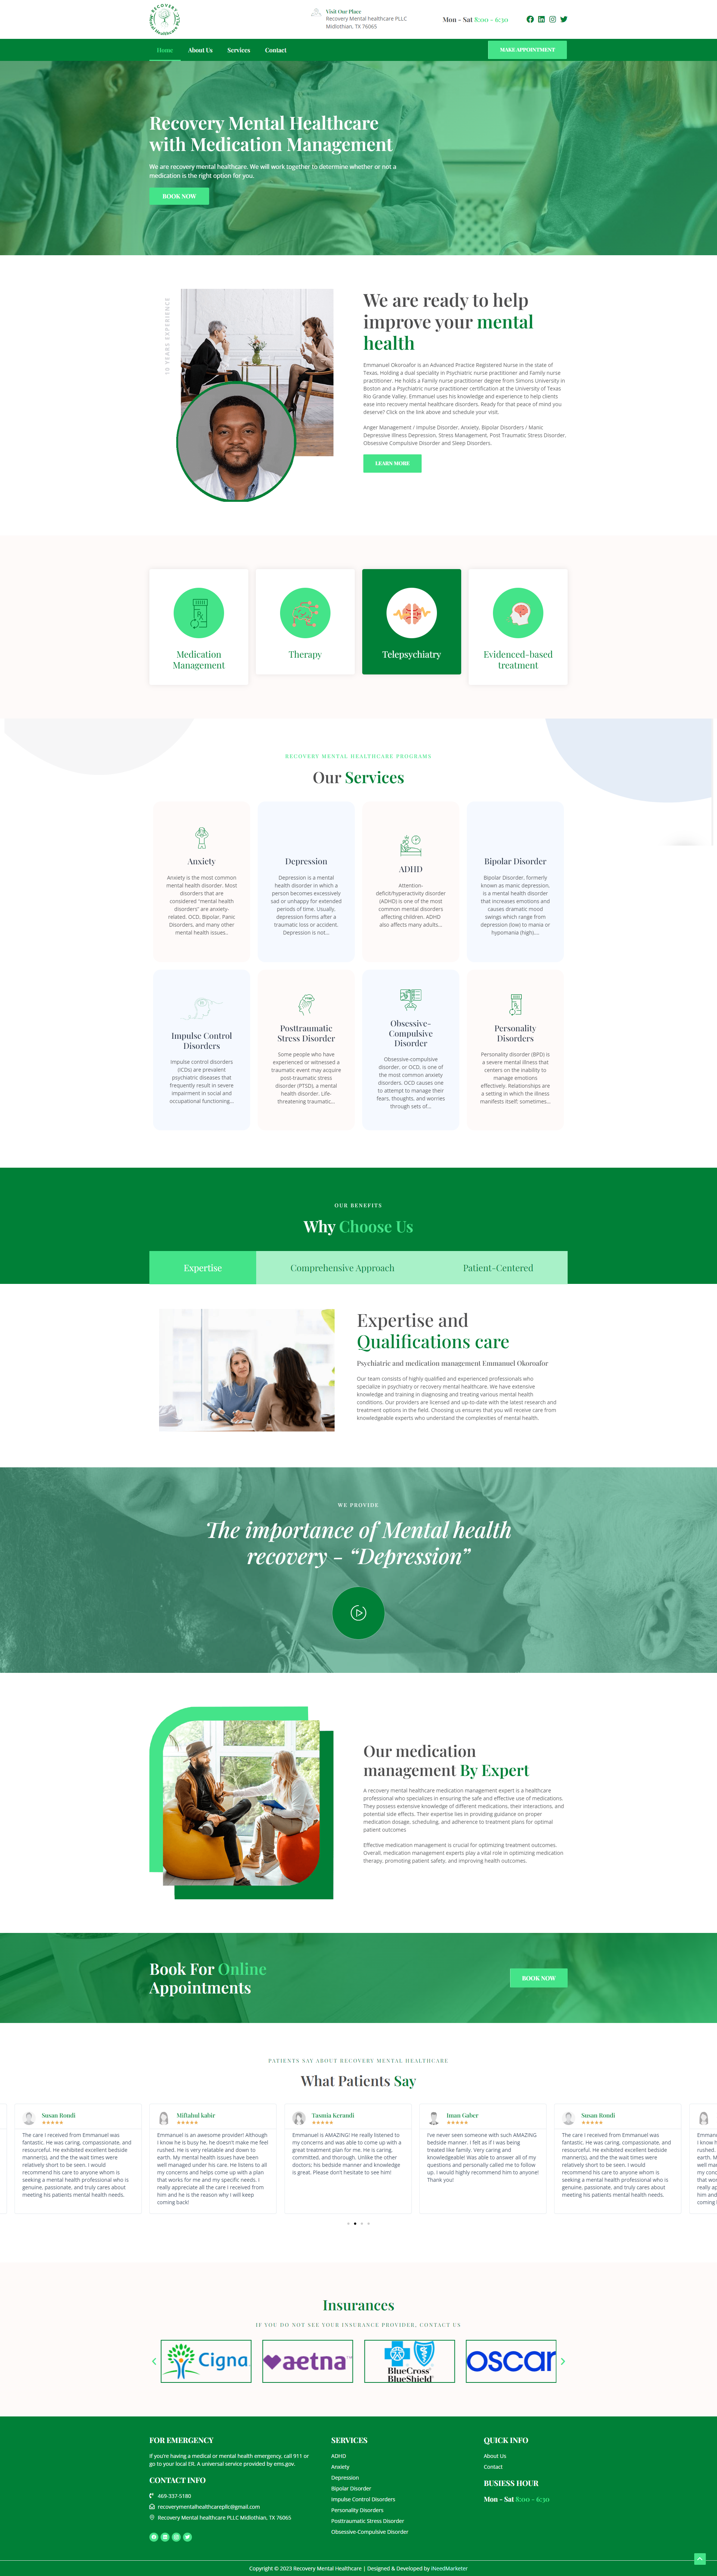 recoverymentalhealthcare - a mental health website designed by iNeedmarketer